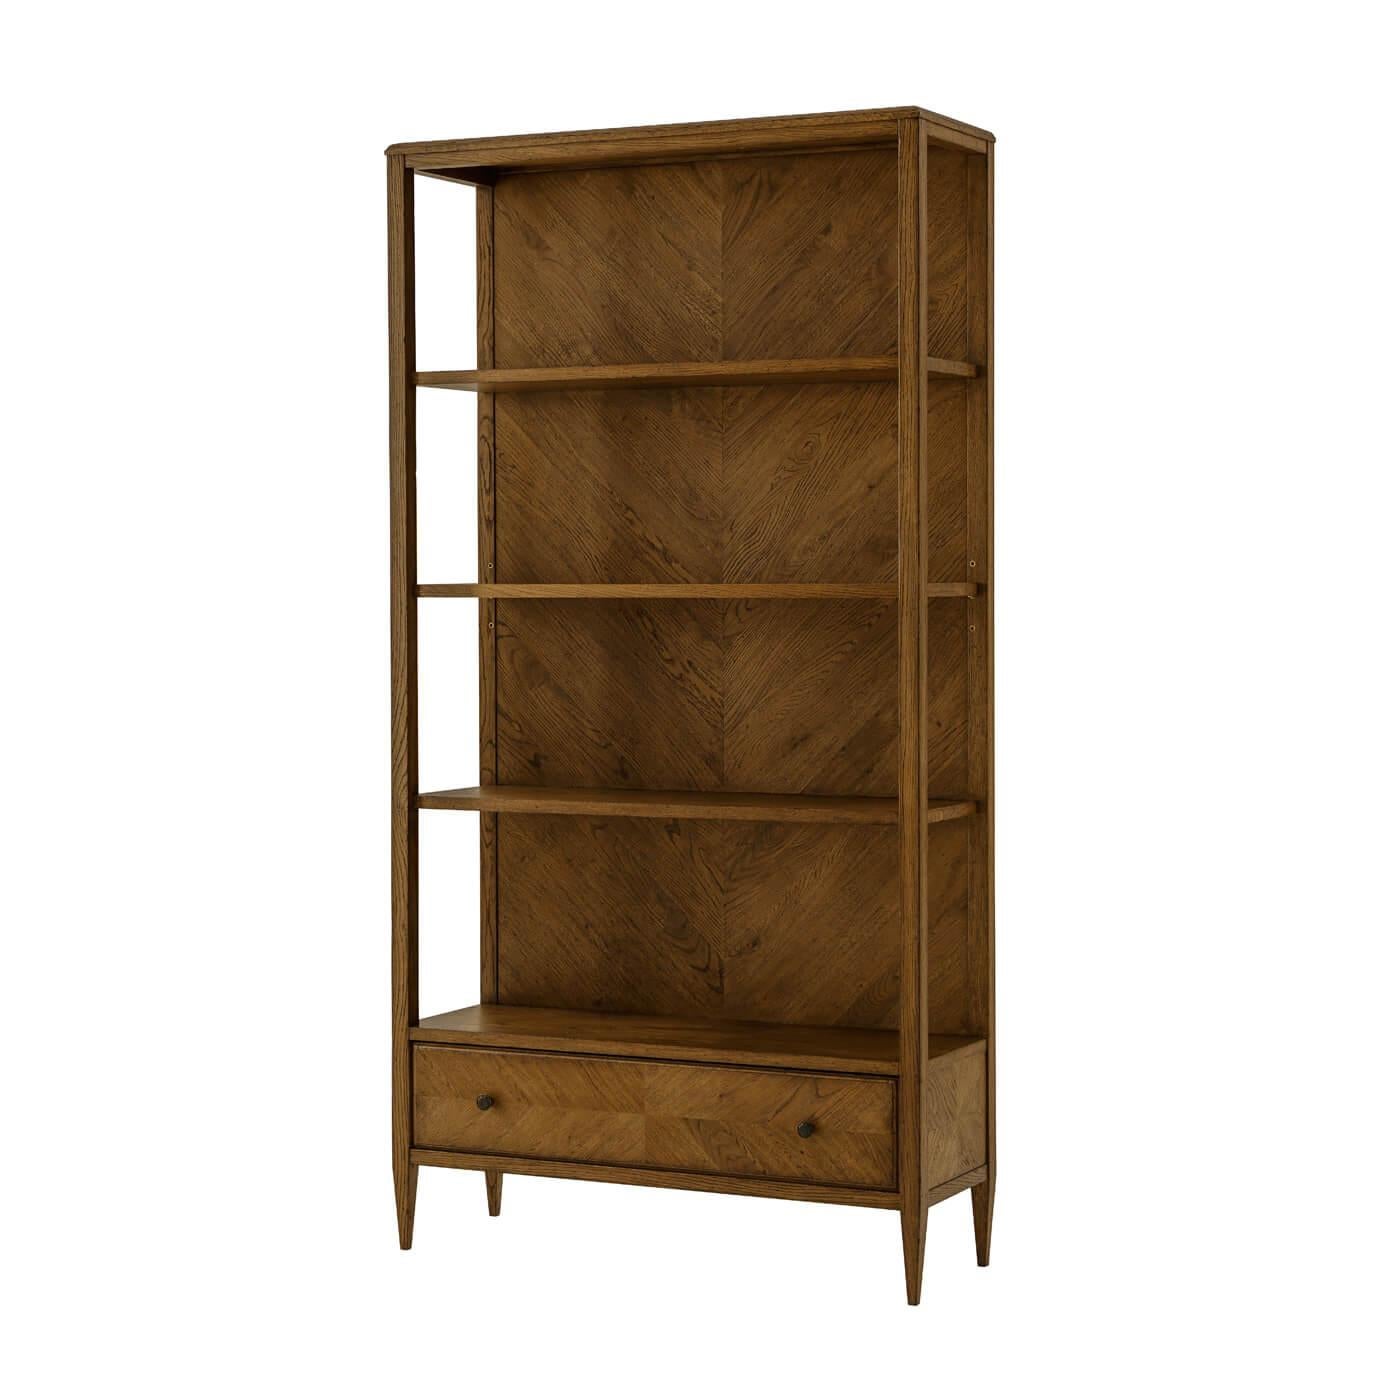 A Modern herringbone parquetry bookcase in our dark oak Dusk finish with three veneered shelves and a herringbone parquetry design on the bottom drawer. It sits on tapered legs with Verde Bronze finished knobs. A beautiful functional piece for